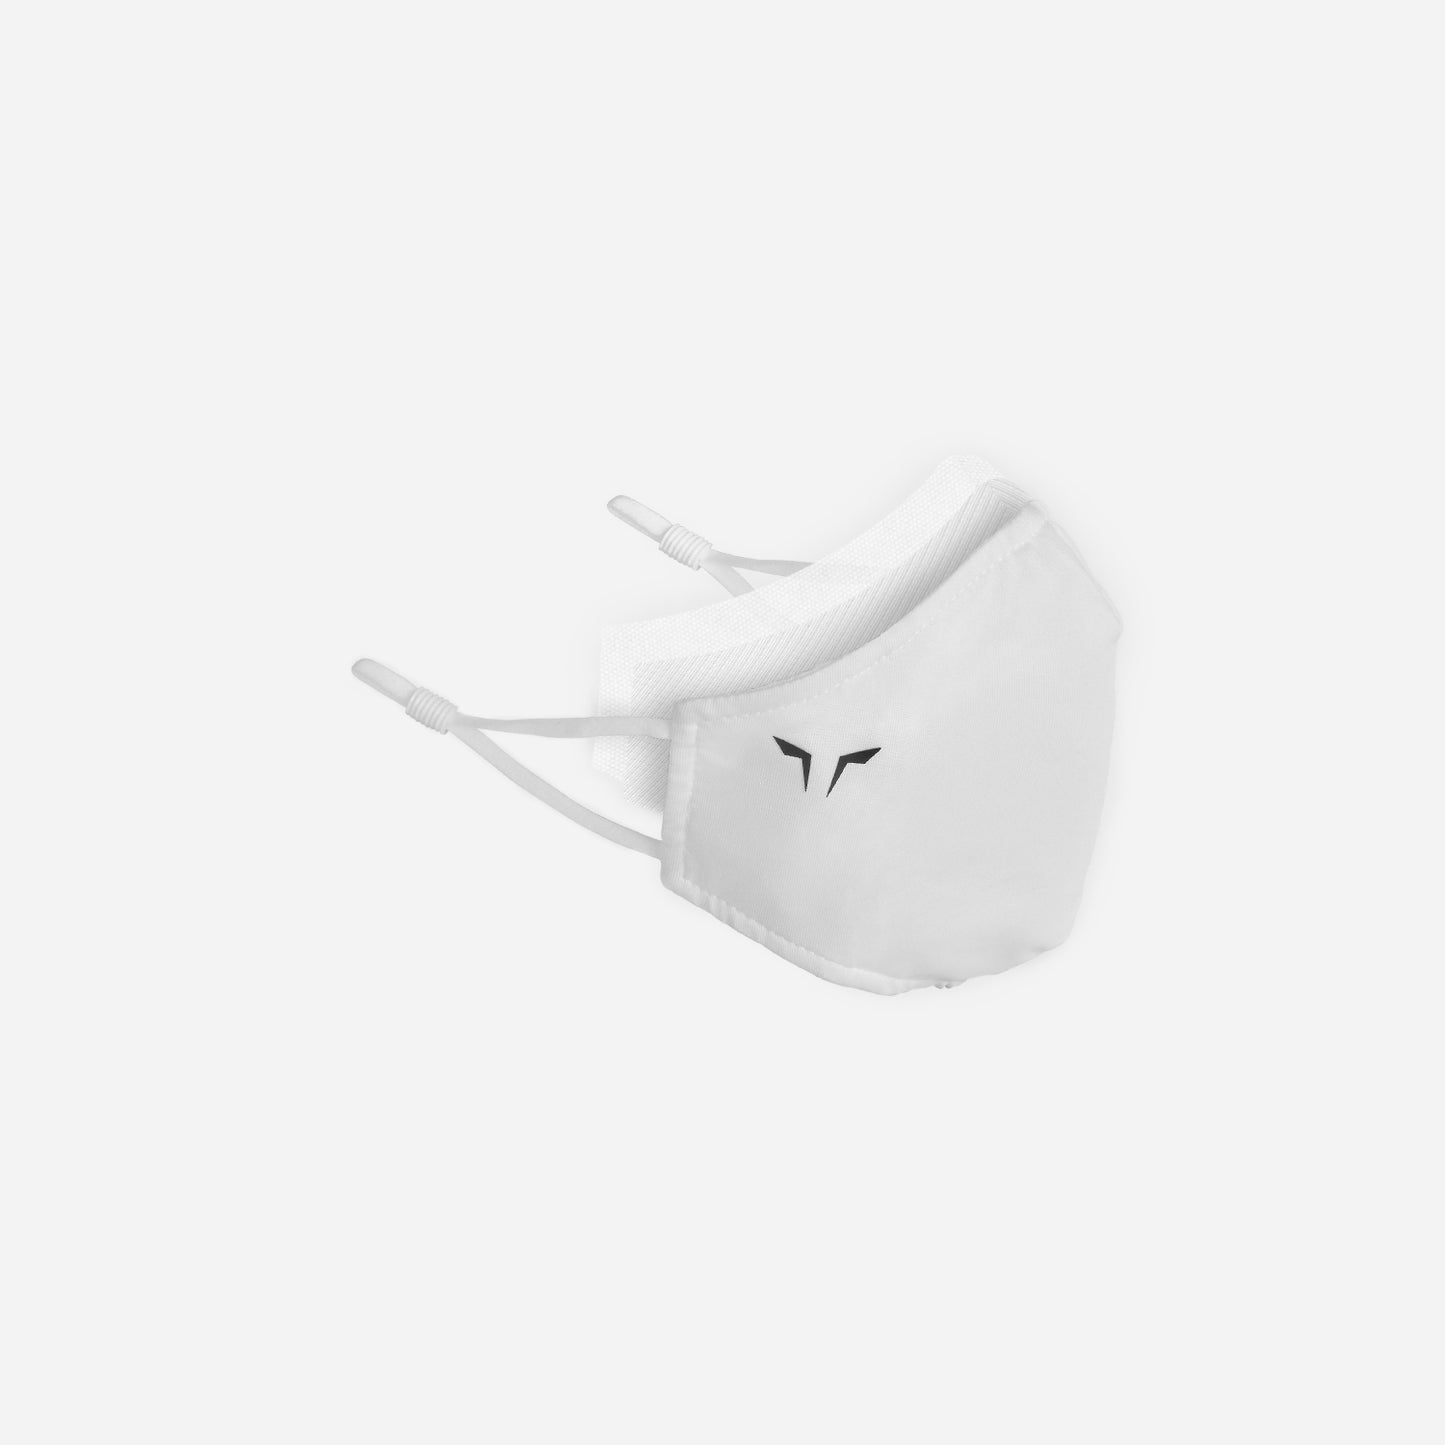 pack-core-masks-white-of-2